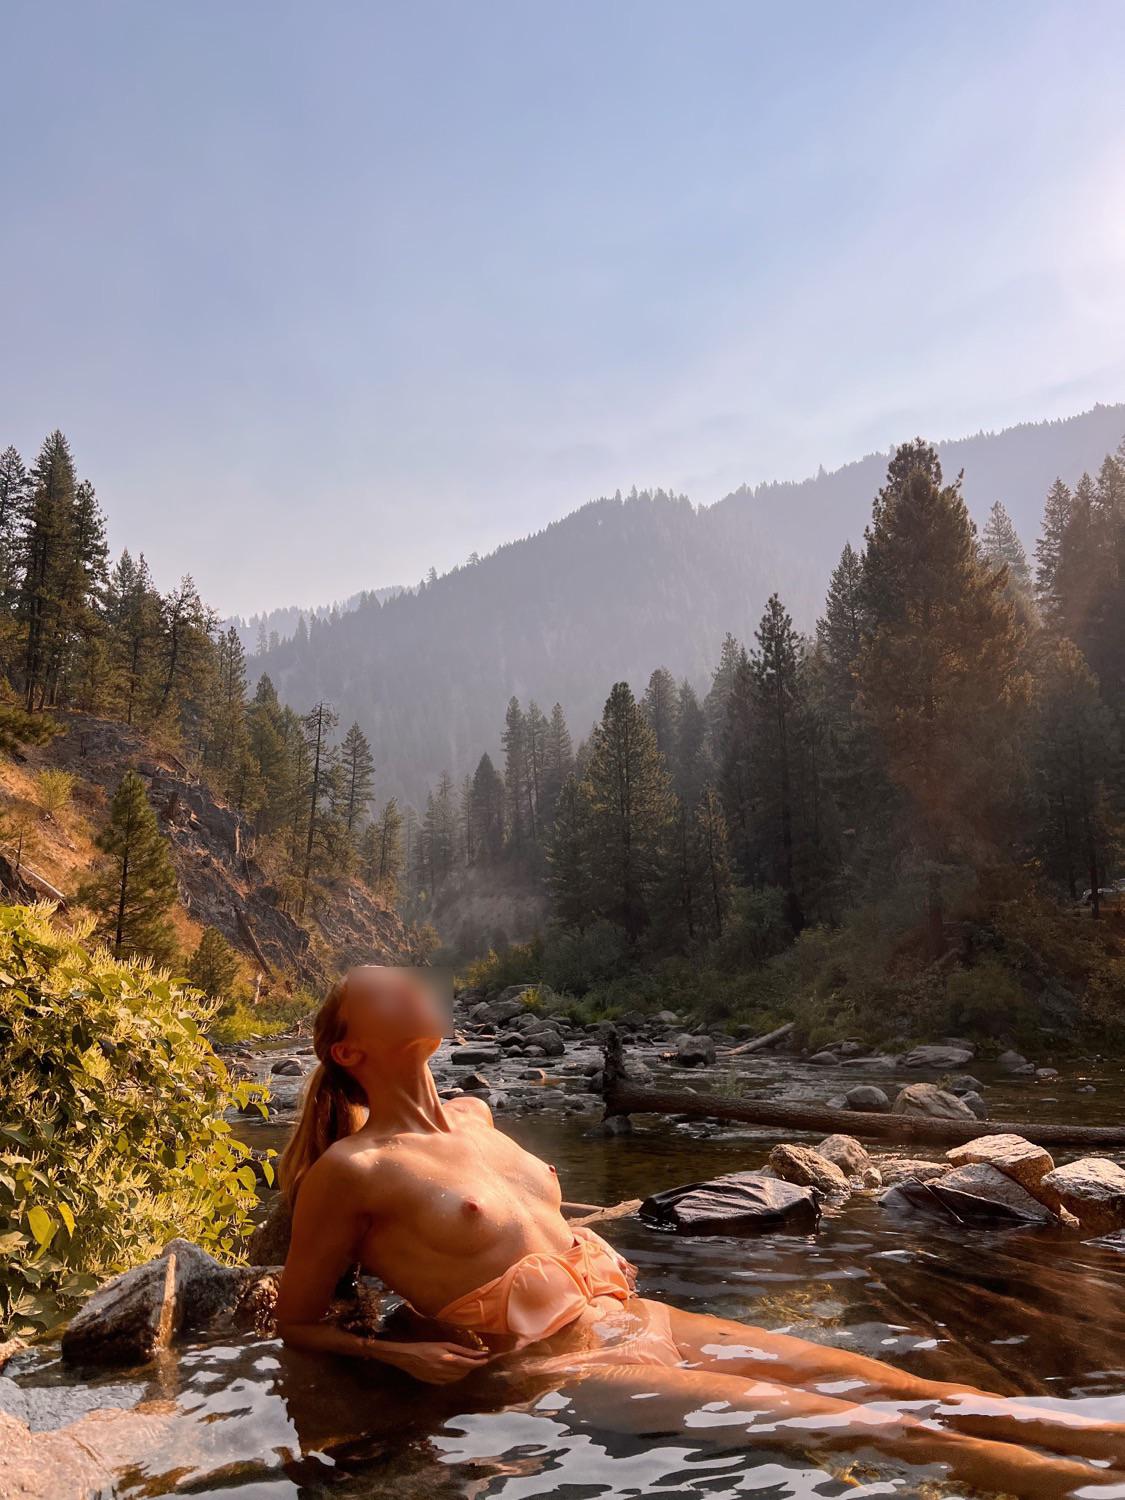 Outdoor Hot Springs Orgy - Stripping in a hot springs